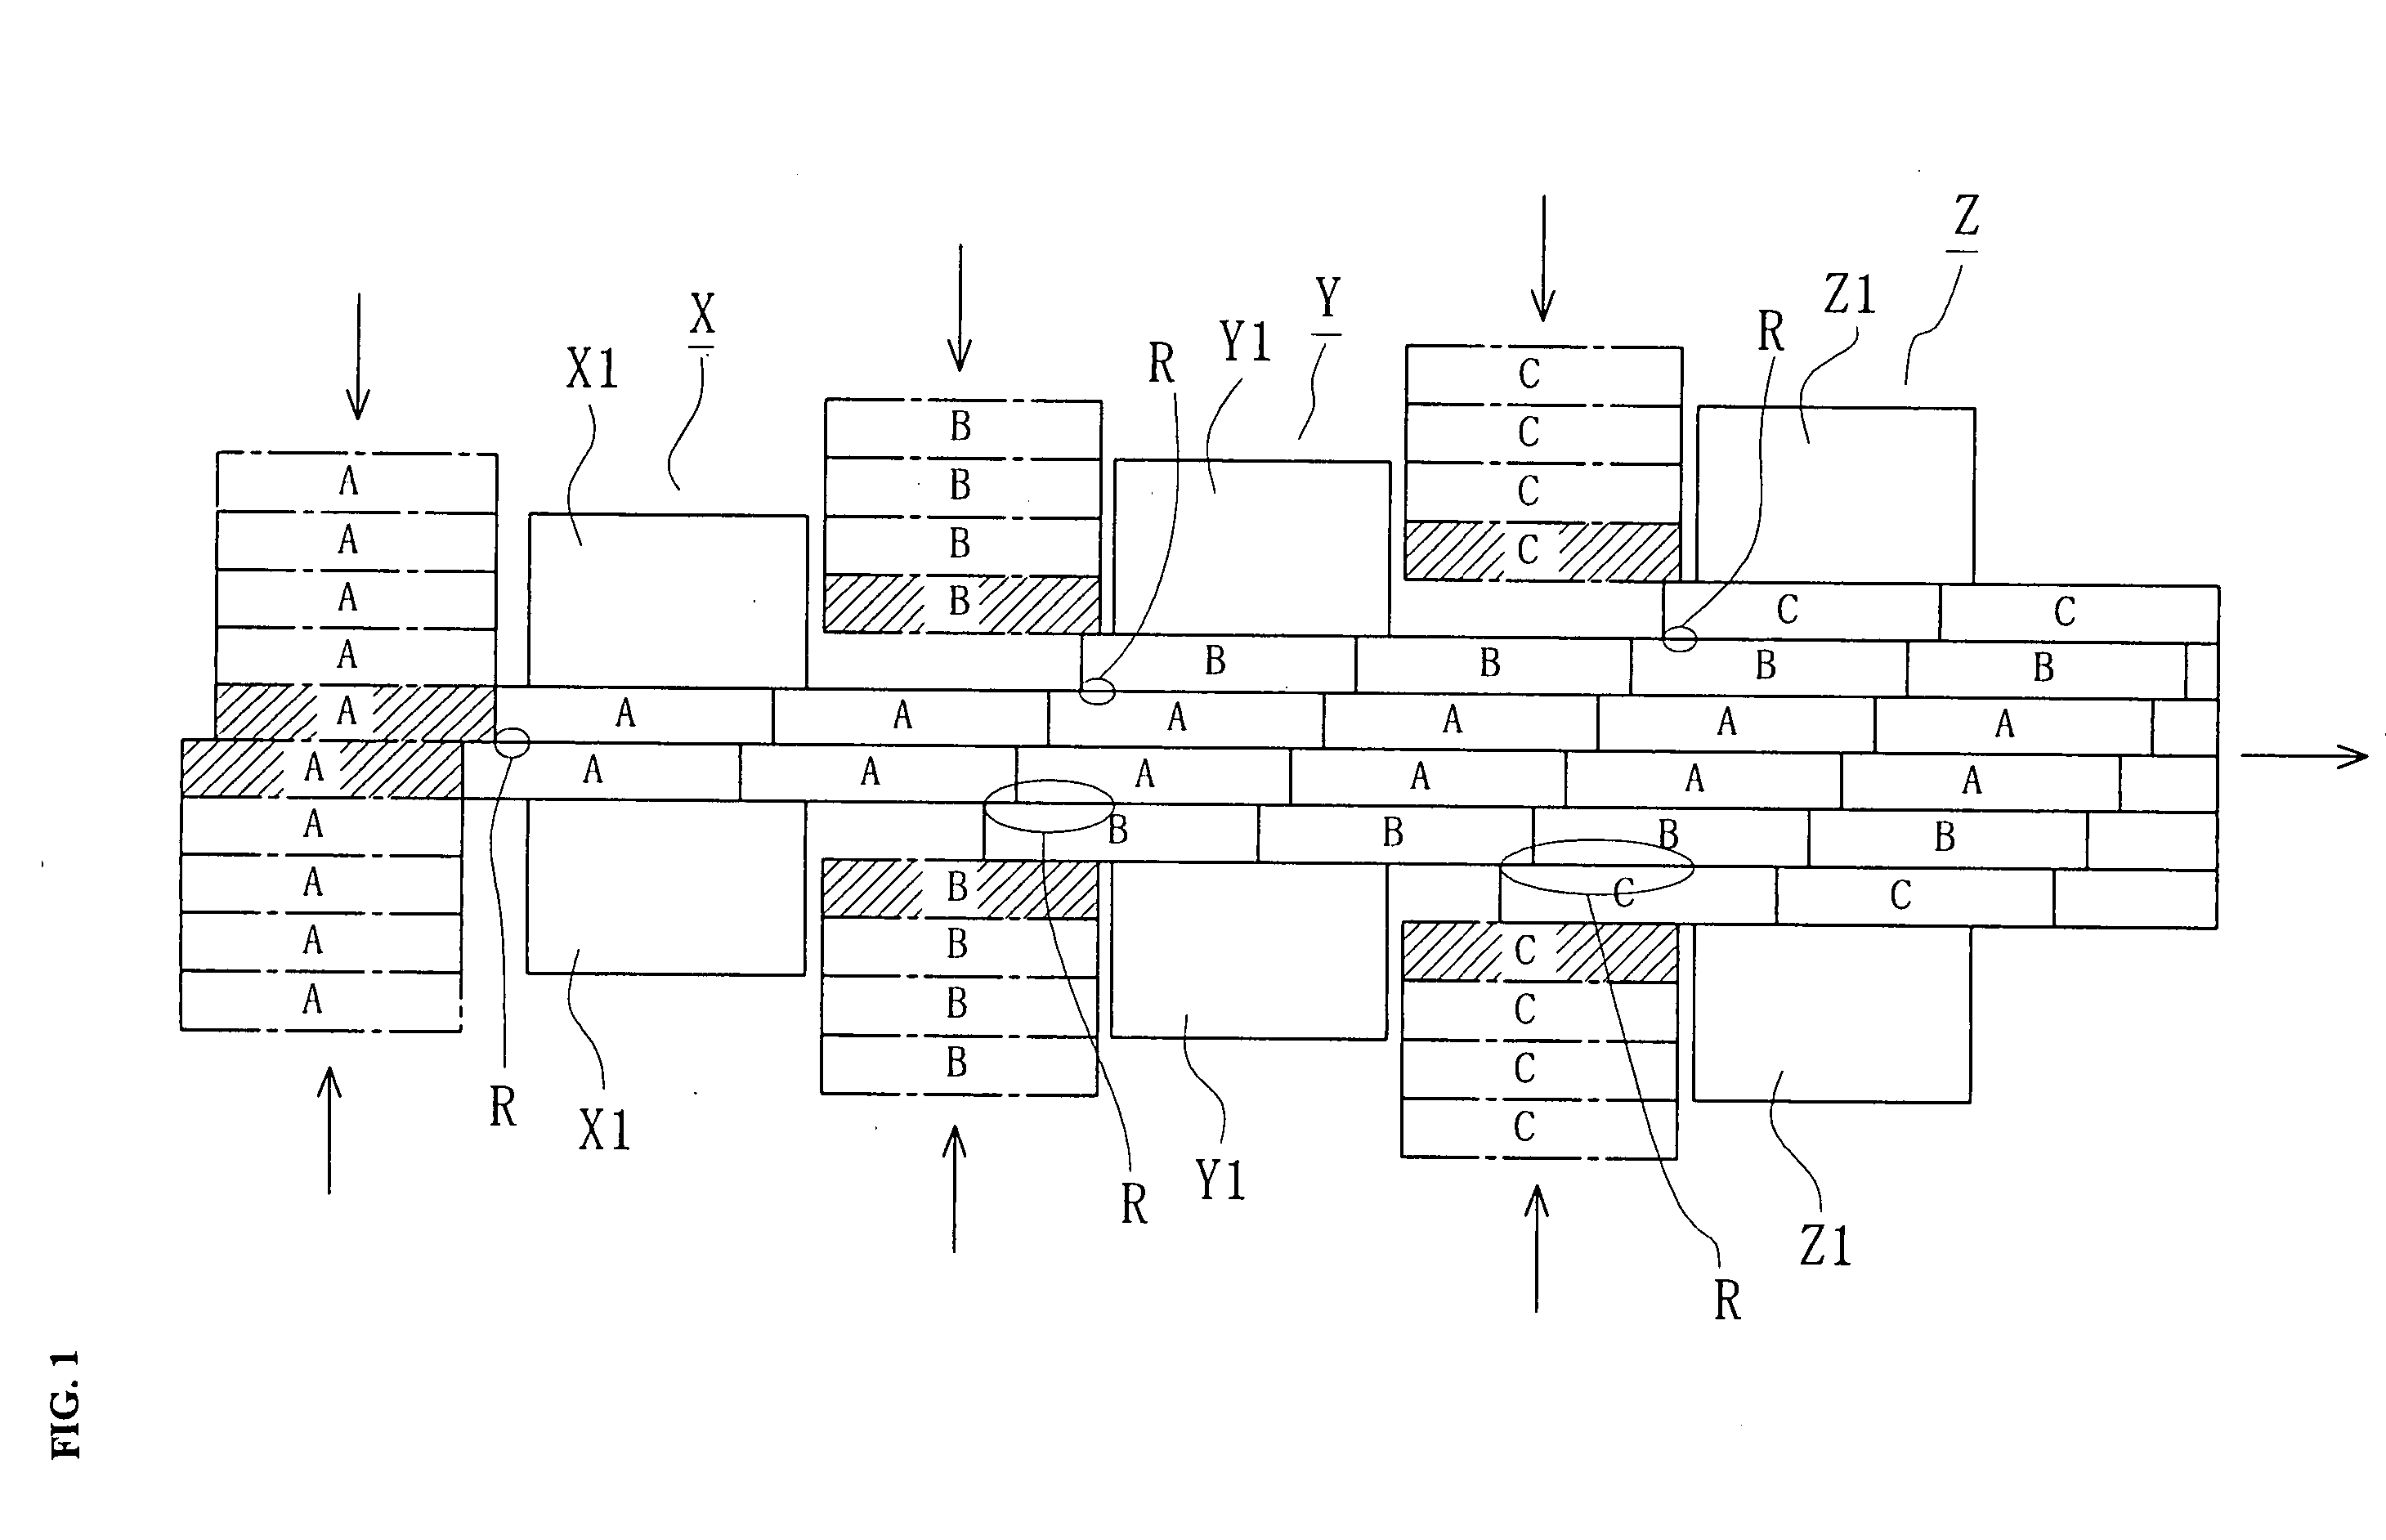 Method and apparatus of manufacturing glued laminated wood